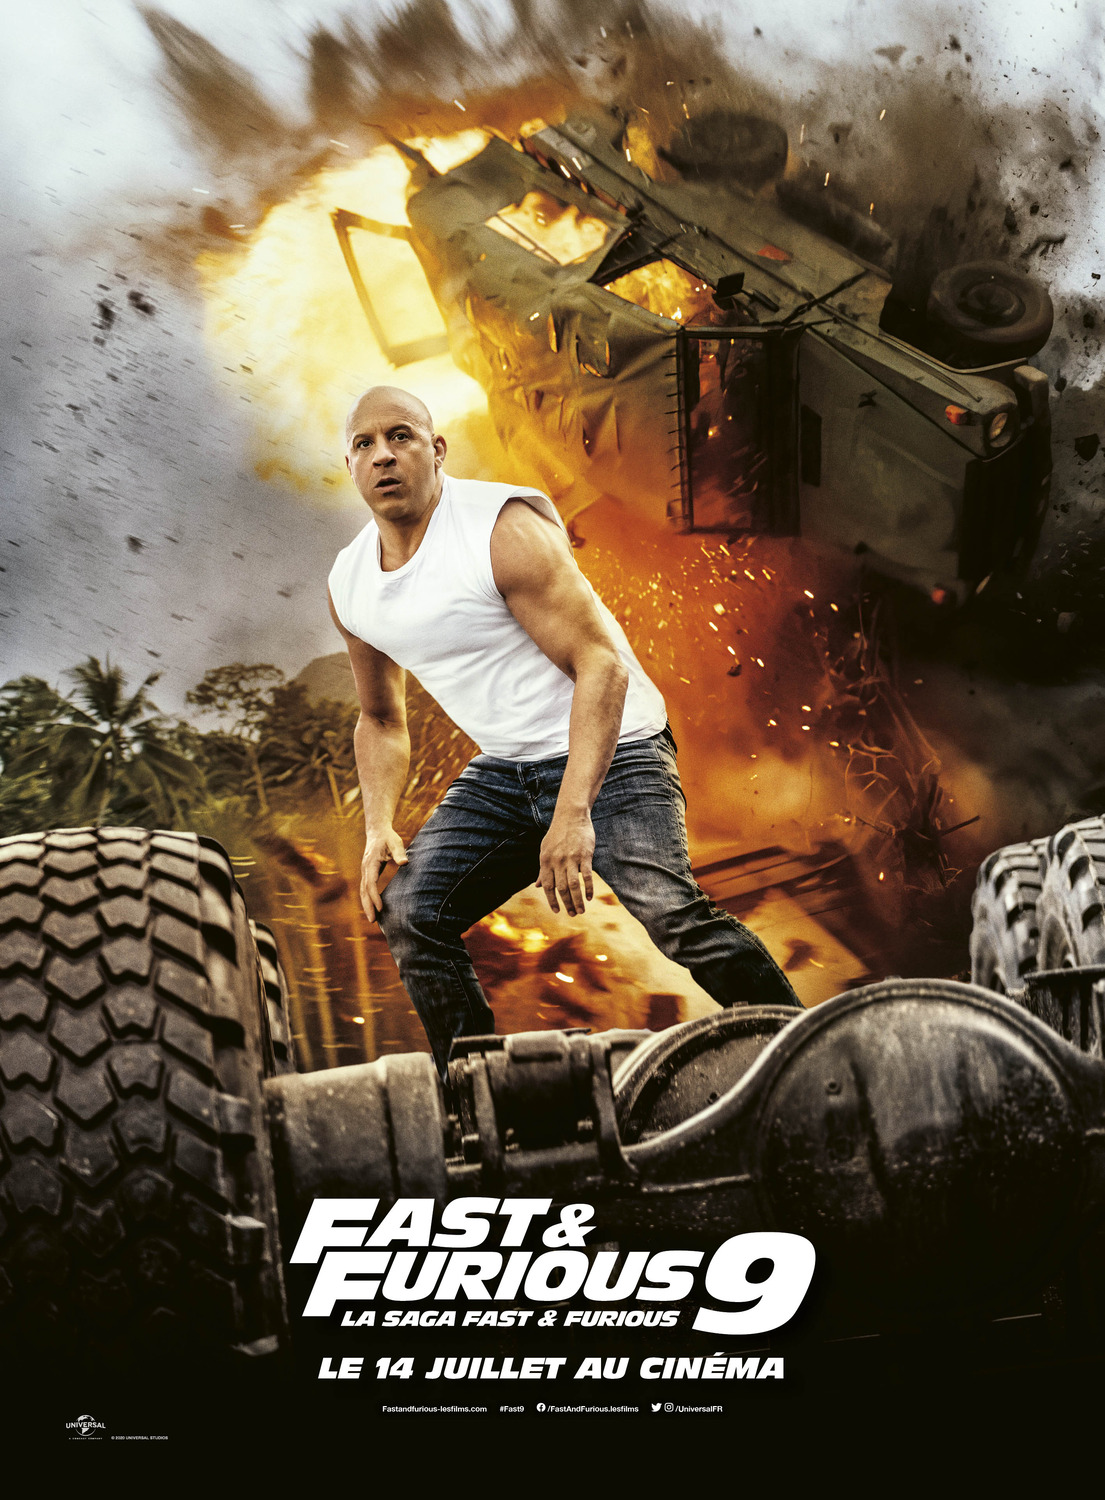 Extra Large Movie Poster Image for Fast & Furious 9 (#16 of 19)